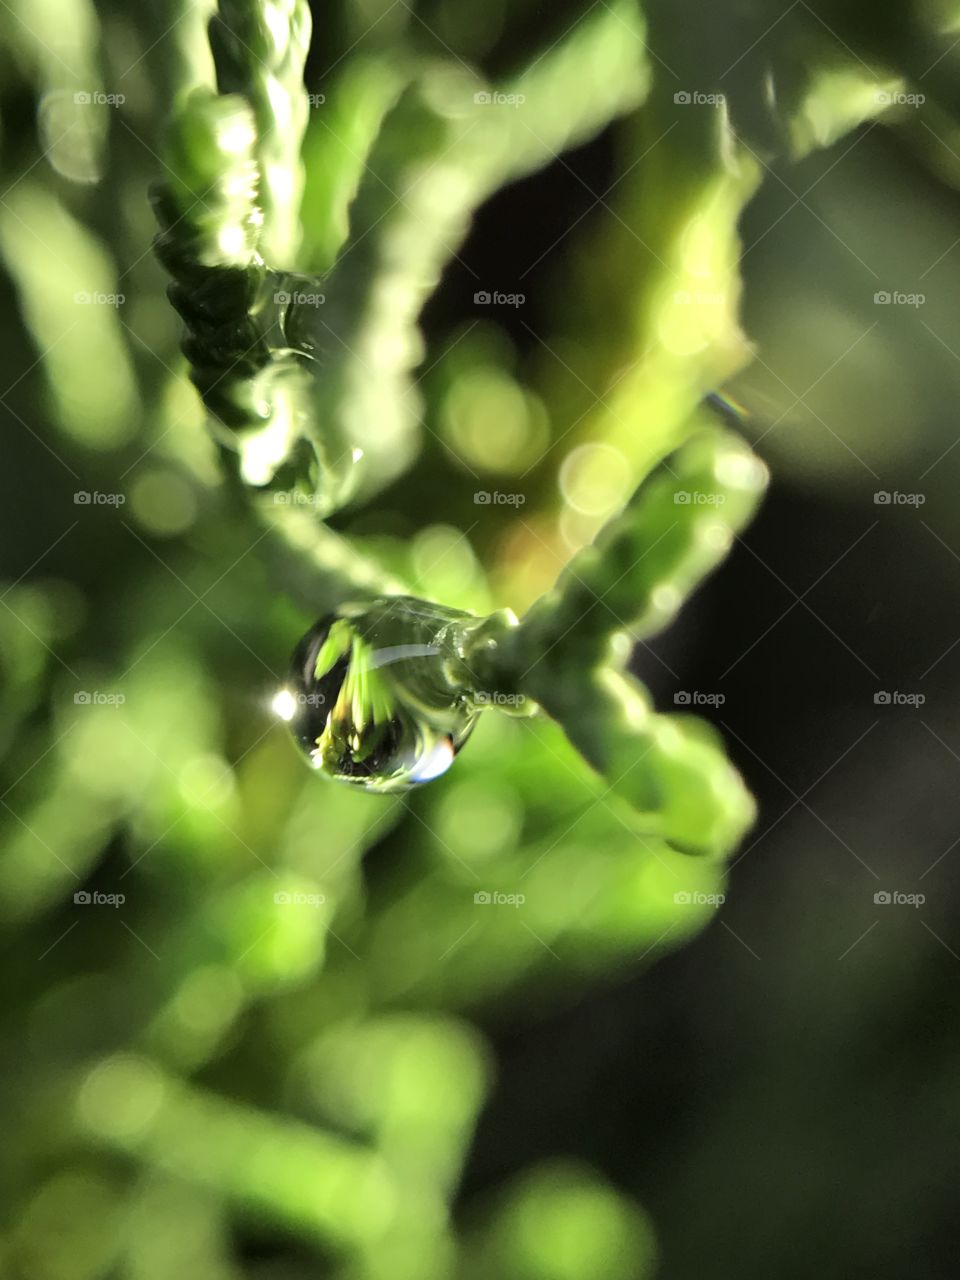 Water drop on green leaves and light